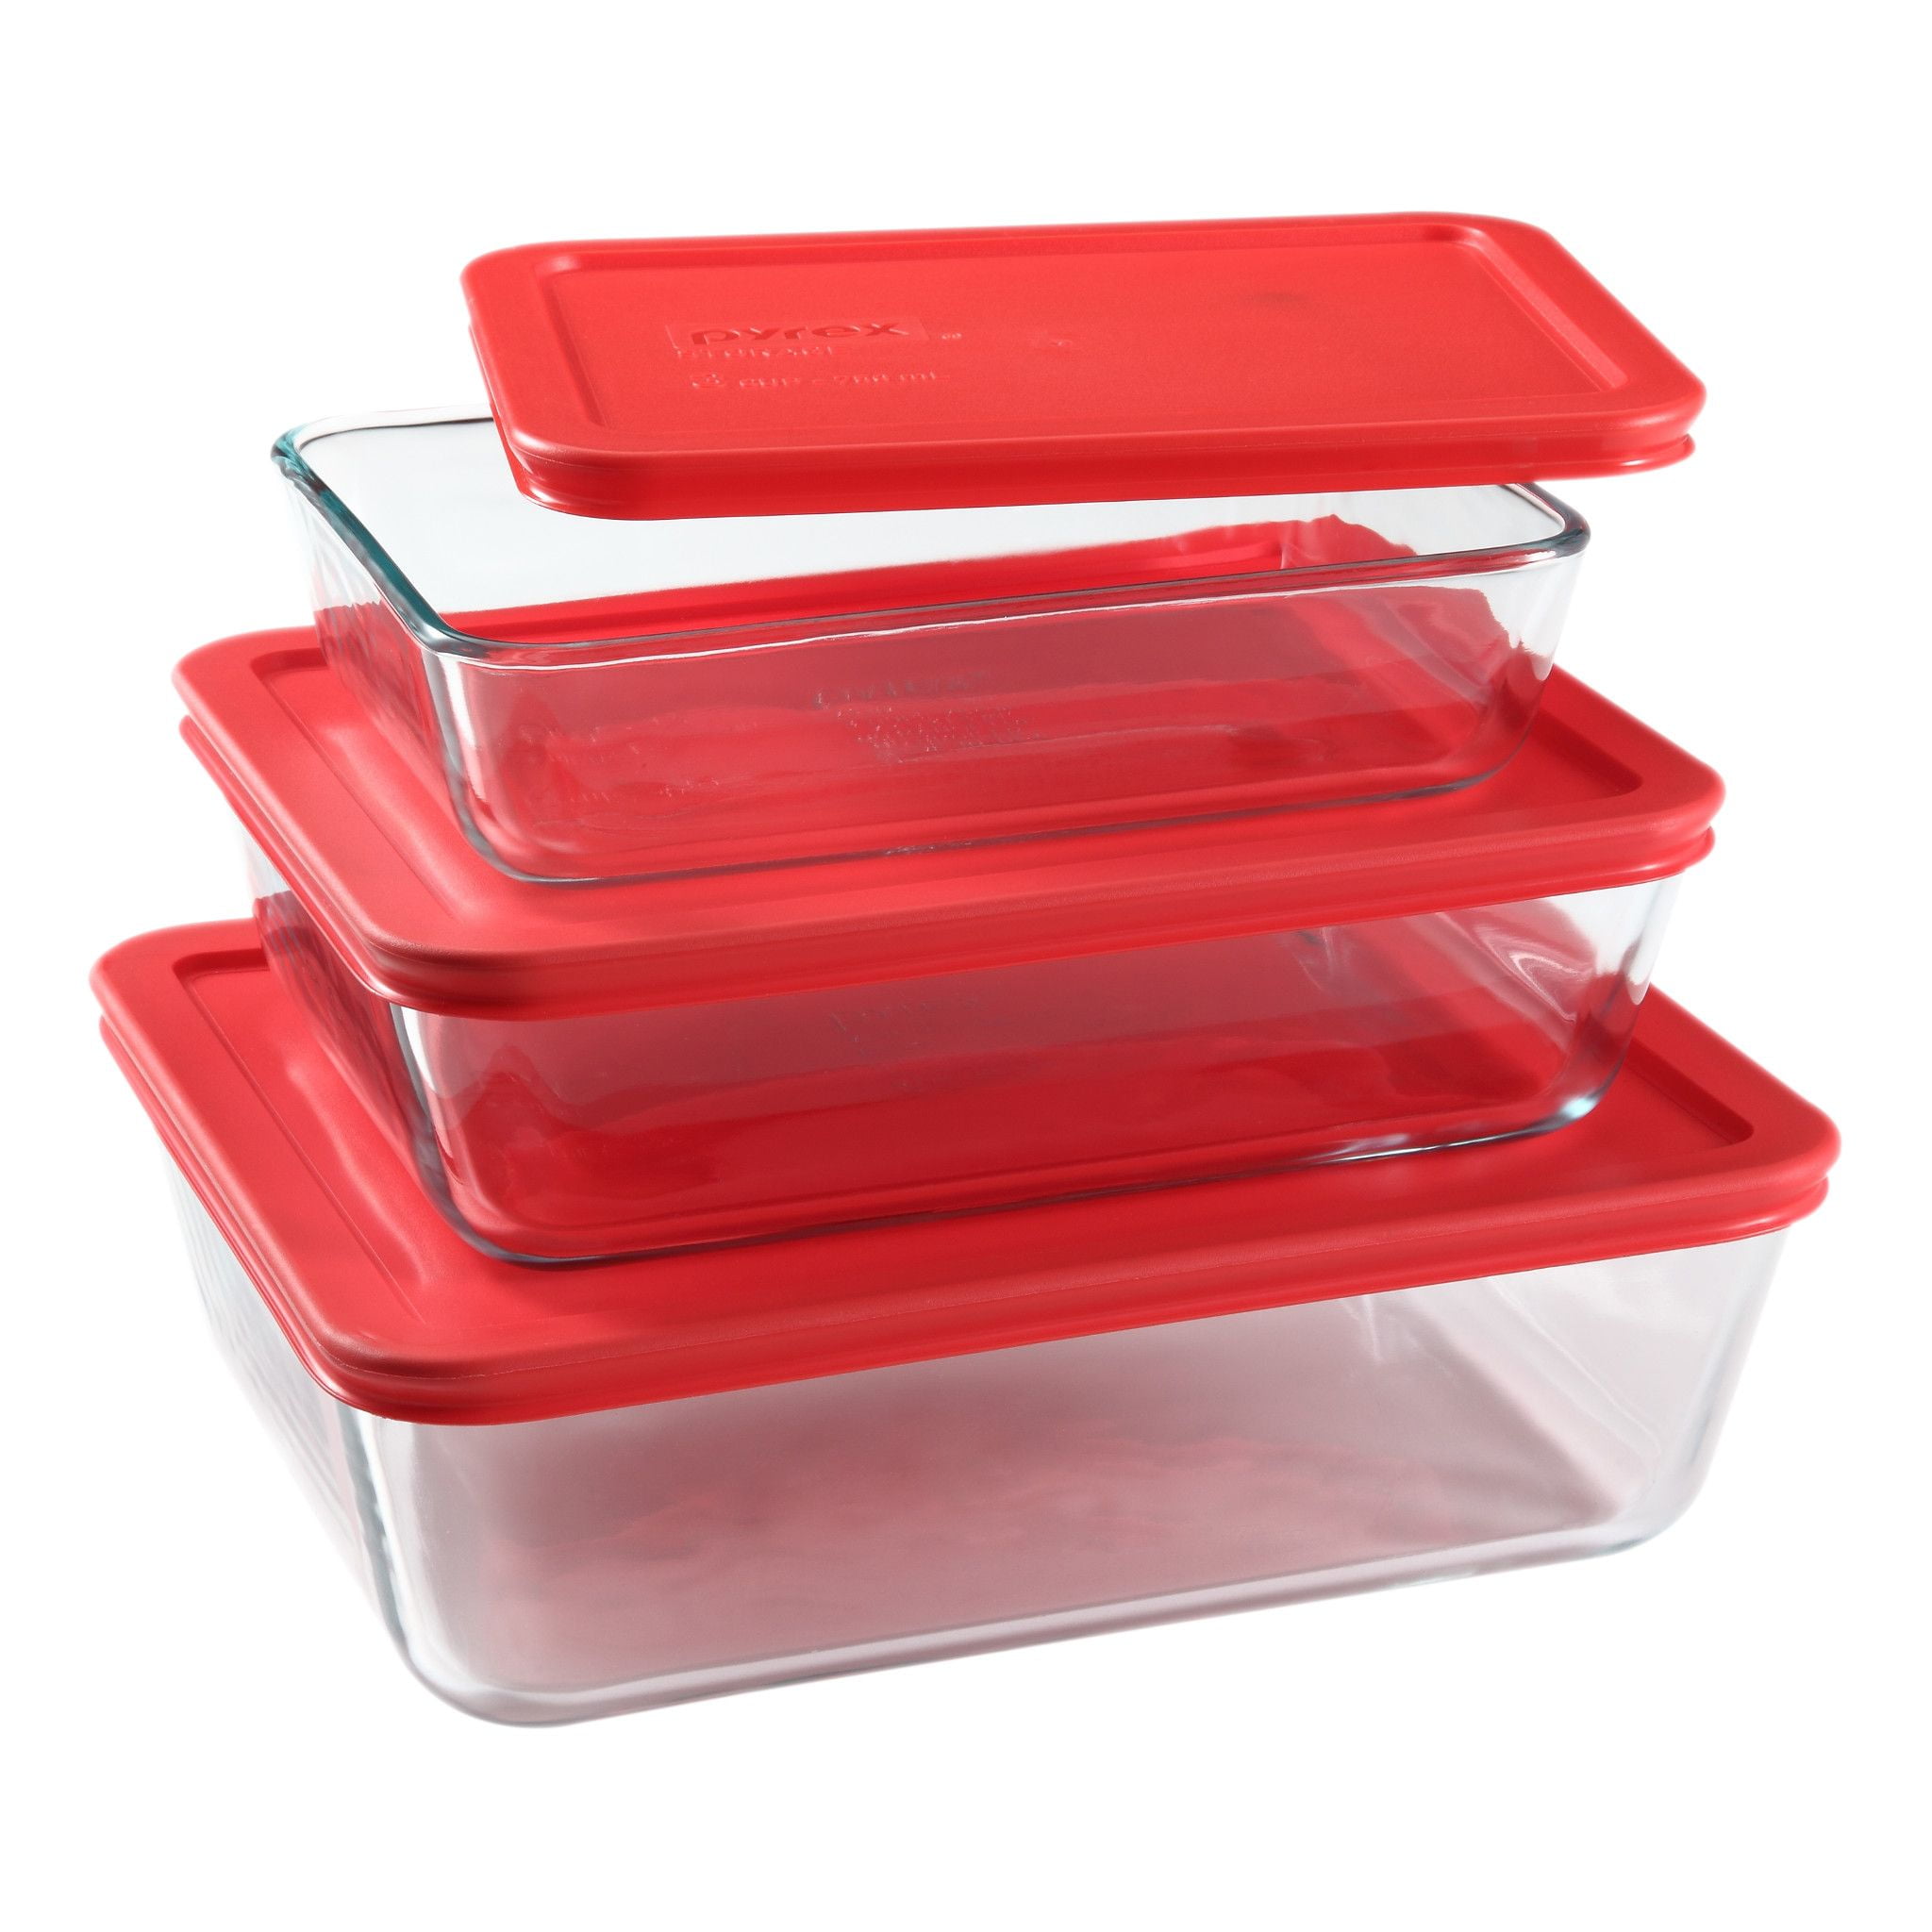 Pyrex 1-cup Storage Containers (Pack of 6) - Total 12-Piece Value Pack